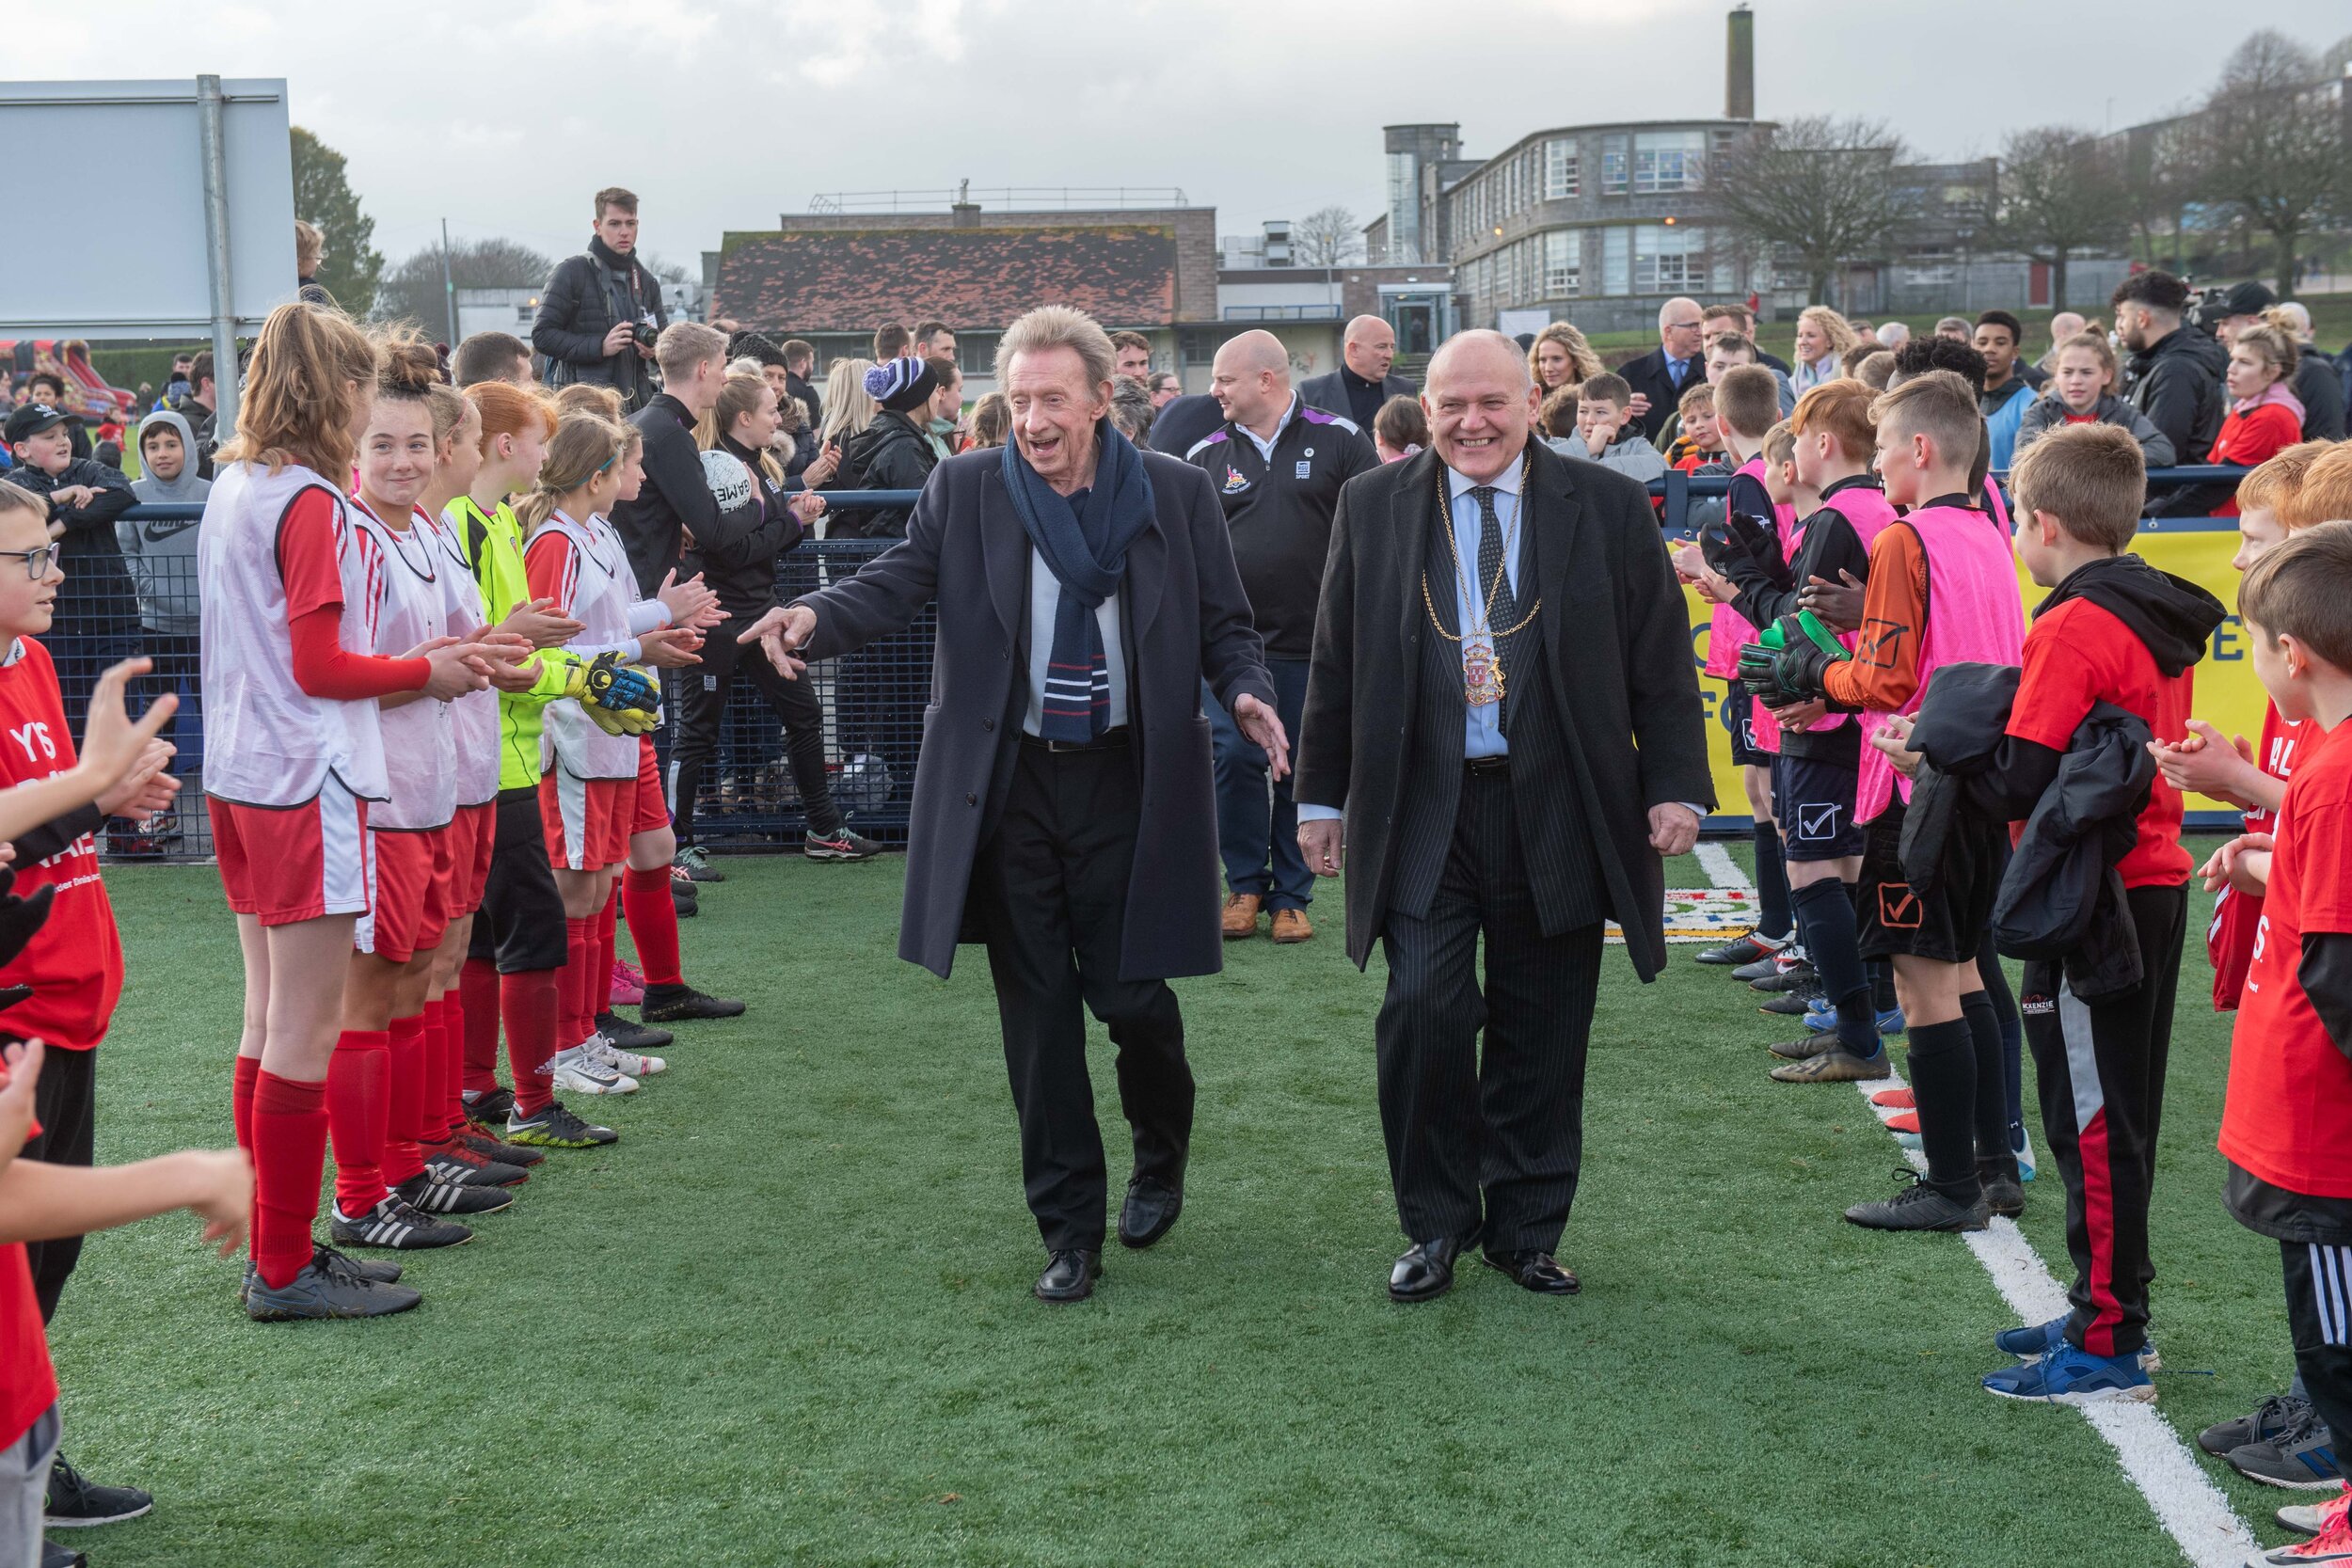 Denis and Lord Provost. Credit: ACC